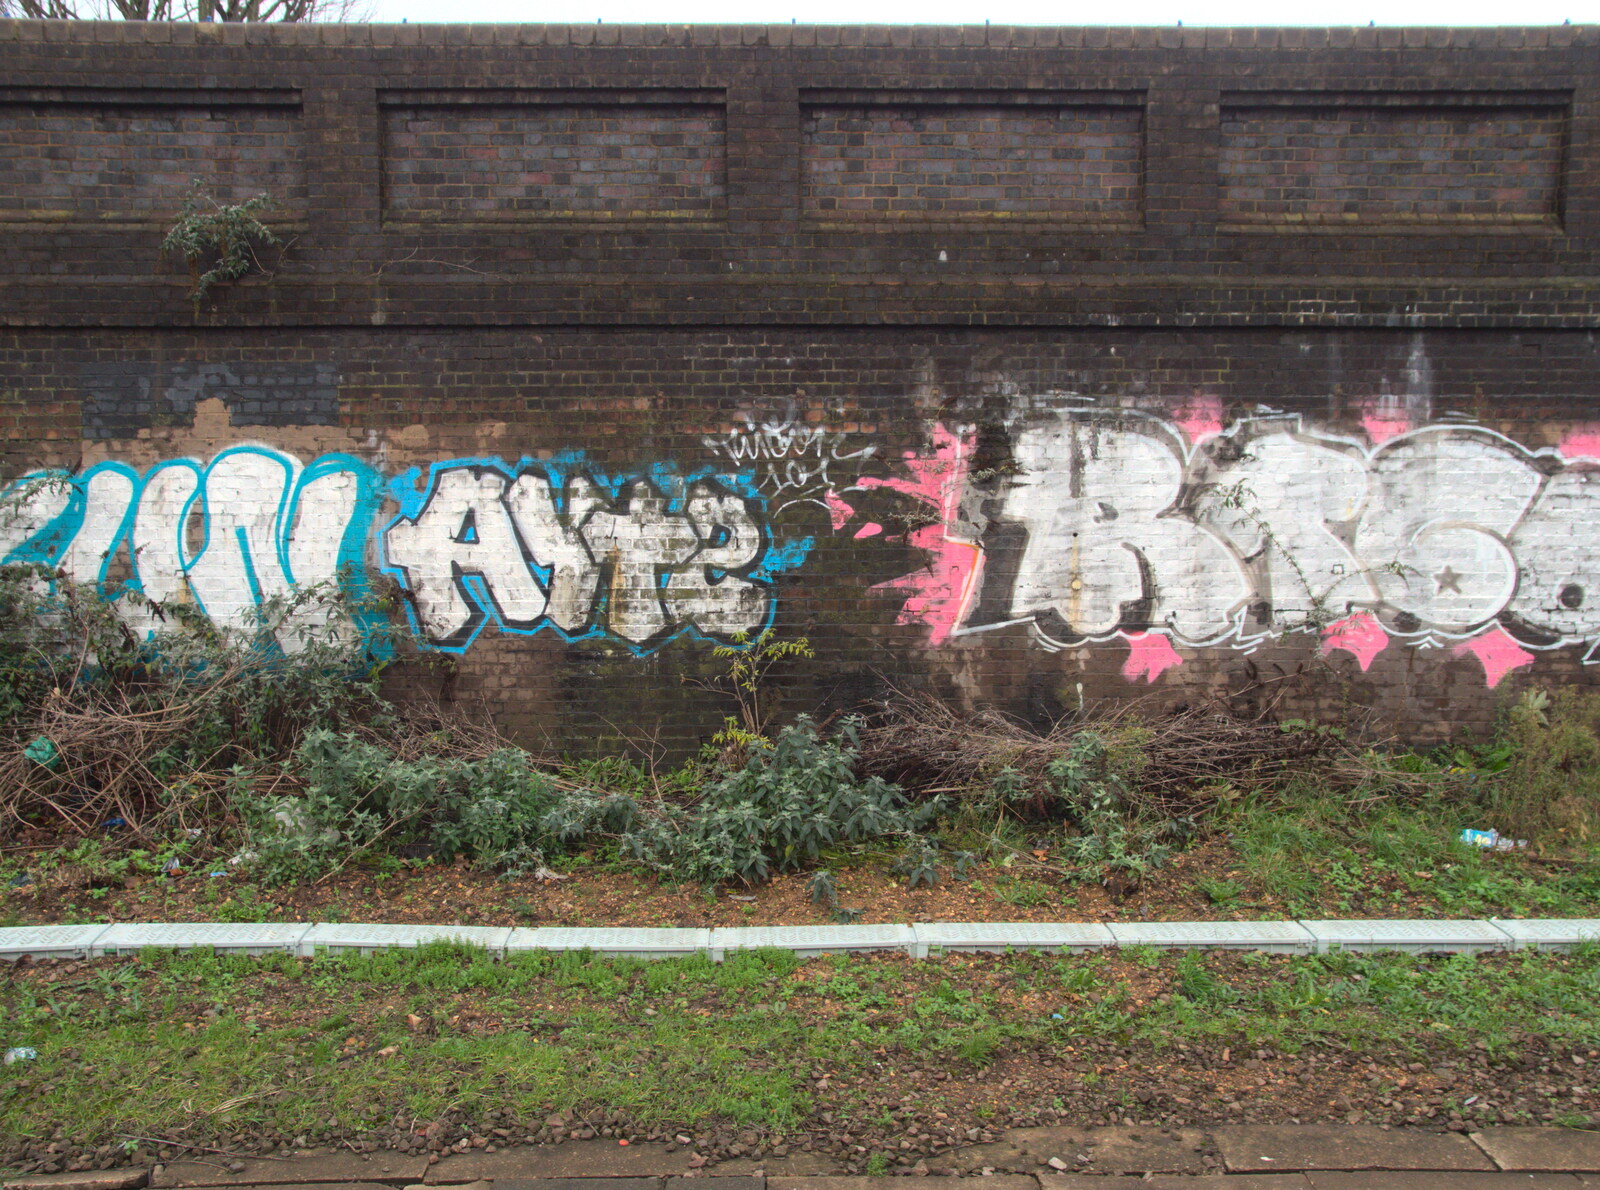 More fading tags from A London Lunch, Borough, Southwark - 15th December 2015